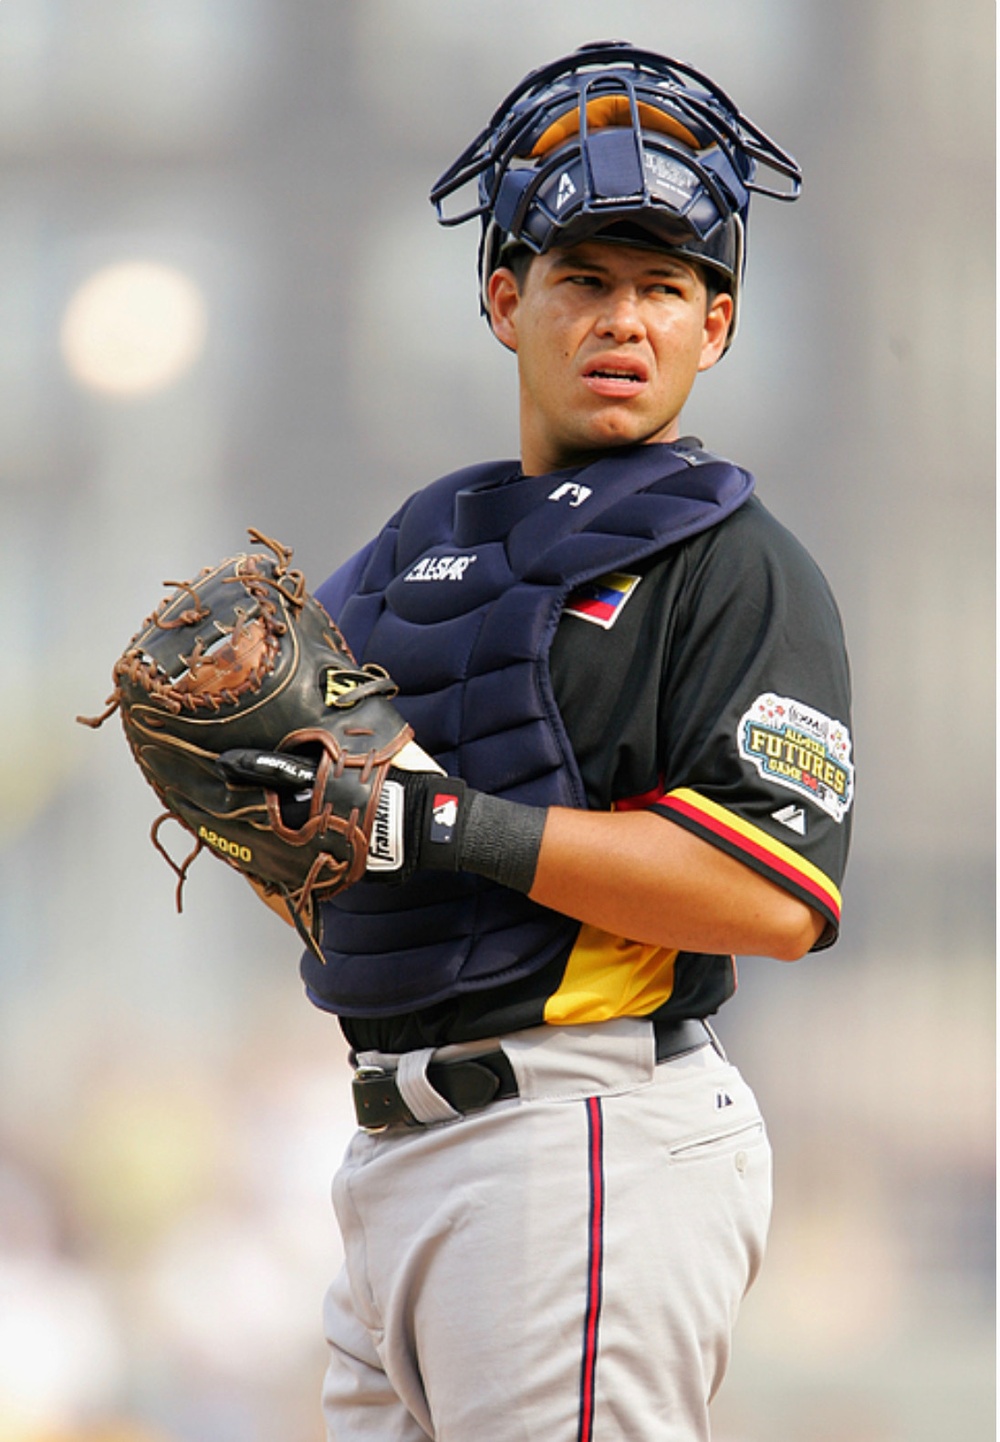 From professional baseball to U.S. Army:  Salomon Manriquez  prepares for new challenge